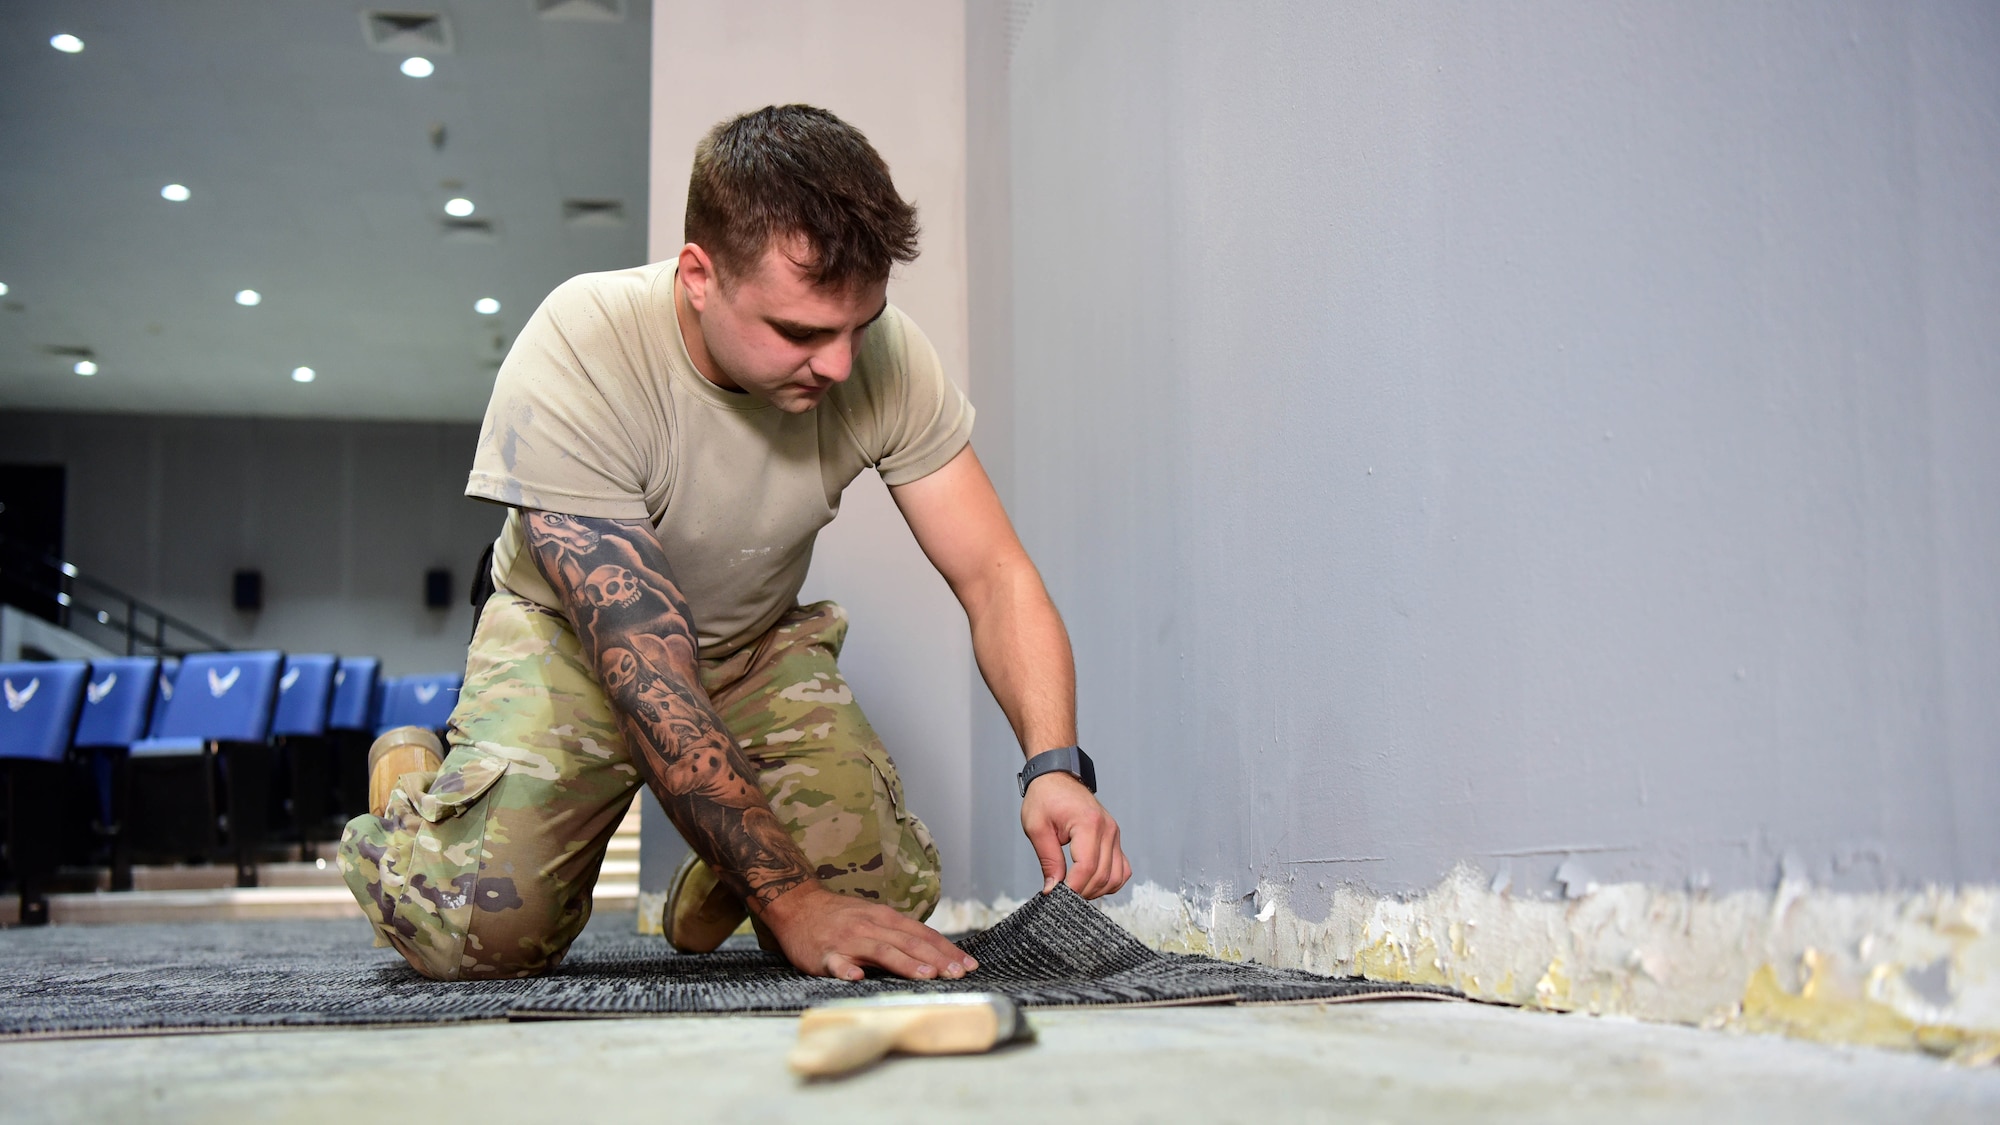 Staff Sgt. Nathan Russian, 386th Expeditionary Civil Engineer Squadron structures journeyman, lays carpet tiles during a building renovation Oct. 10, 2018, at an undisclosed location in Southwest Asia. Russian is this week's Rock Solid Warrior. The Rock Solid Warrior program is a way to recognize and spotlight the Airmen of the 386th Air Expeditionary Wing for their positive impact and commitment to the mission. (U.S. Air Force photo by Staff Sgt. Christopher Stoltz)